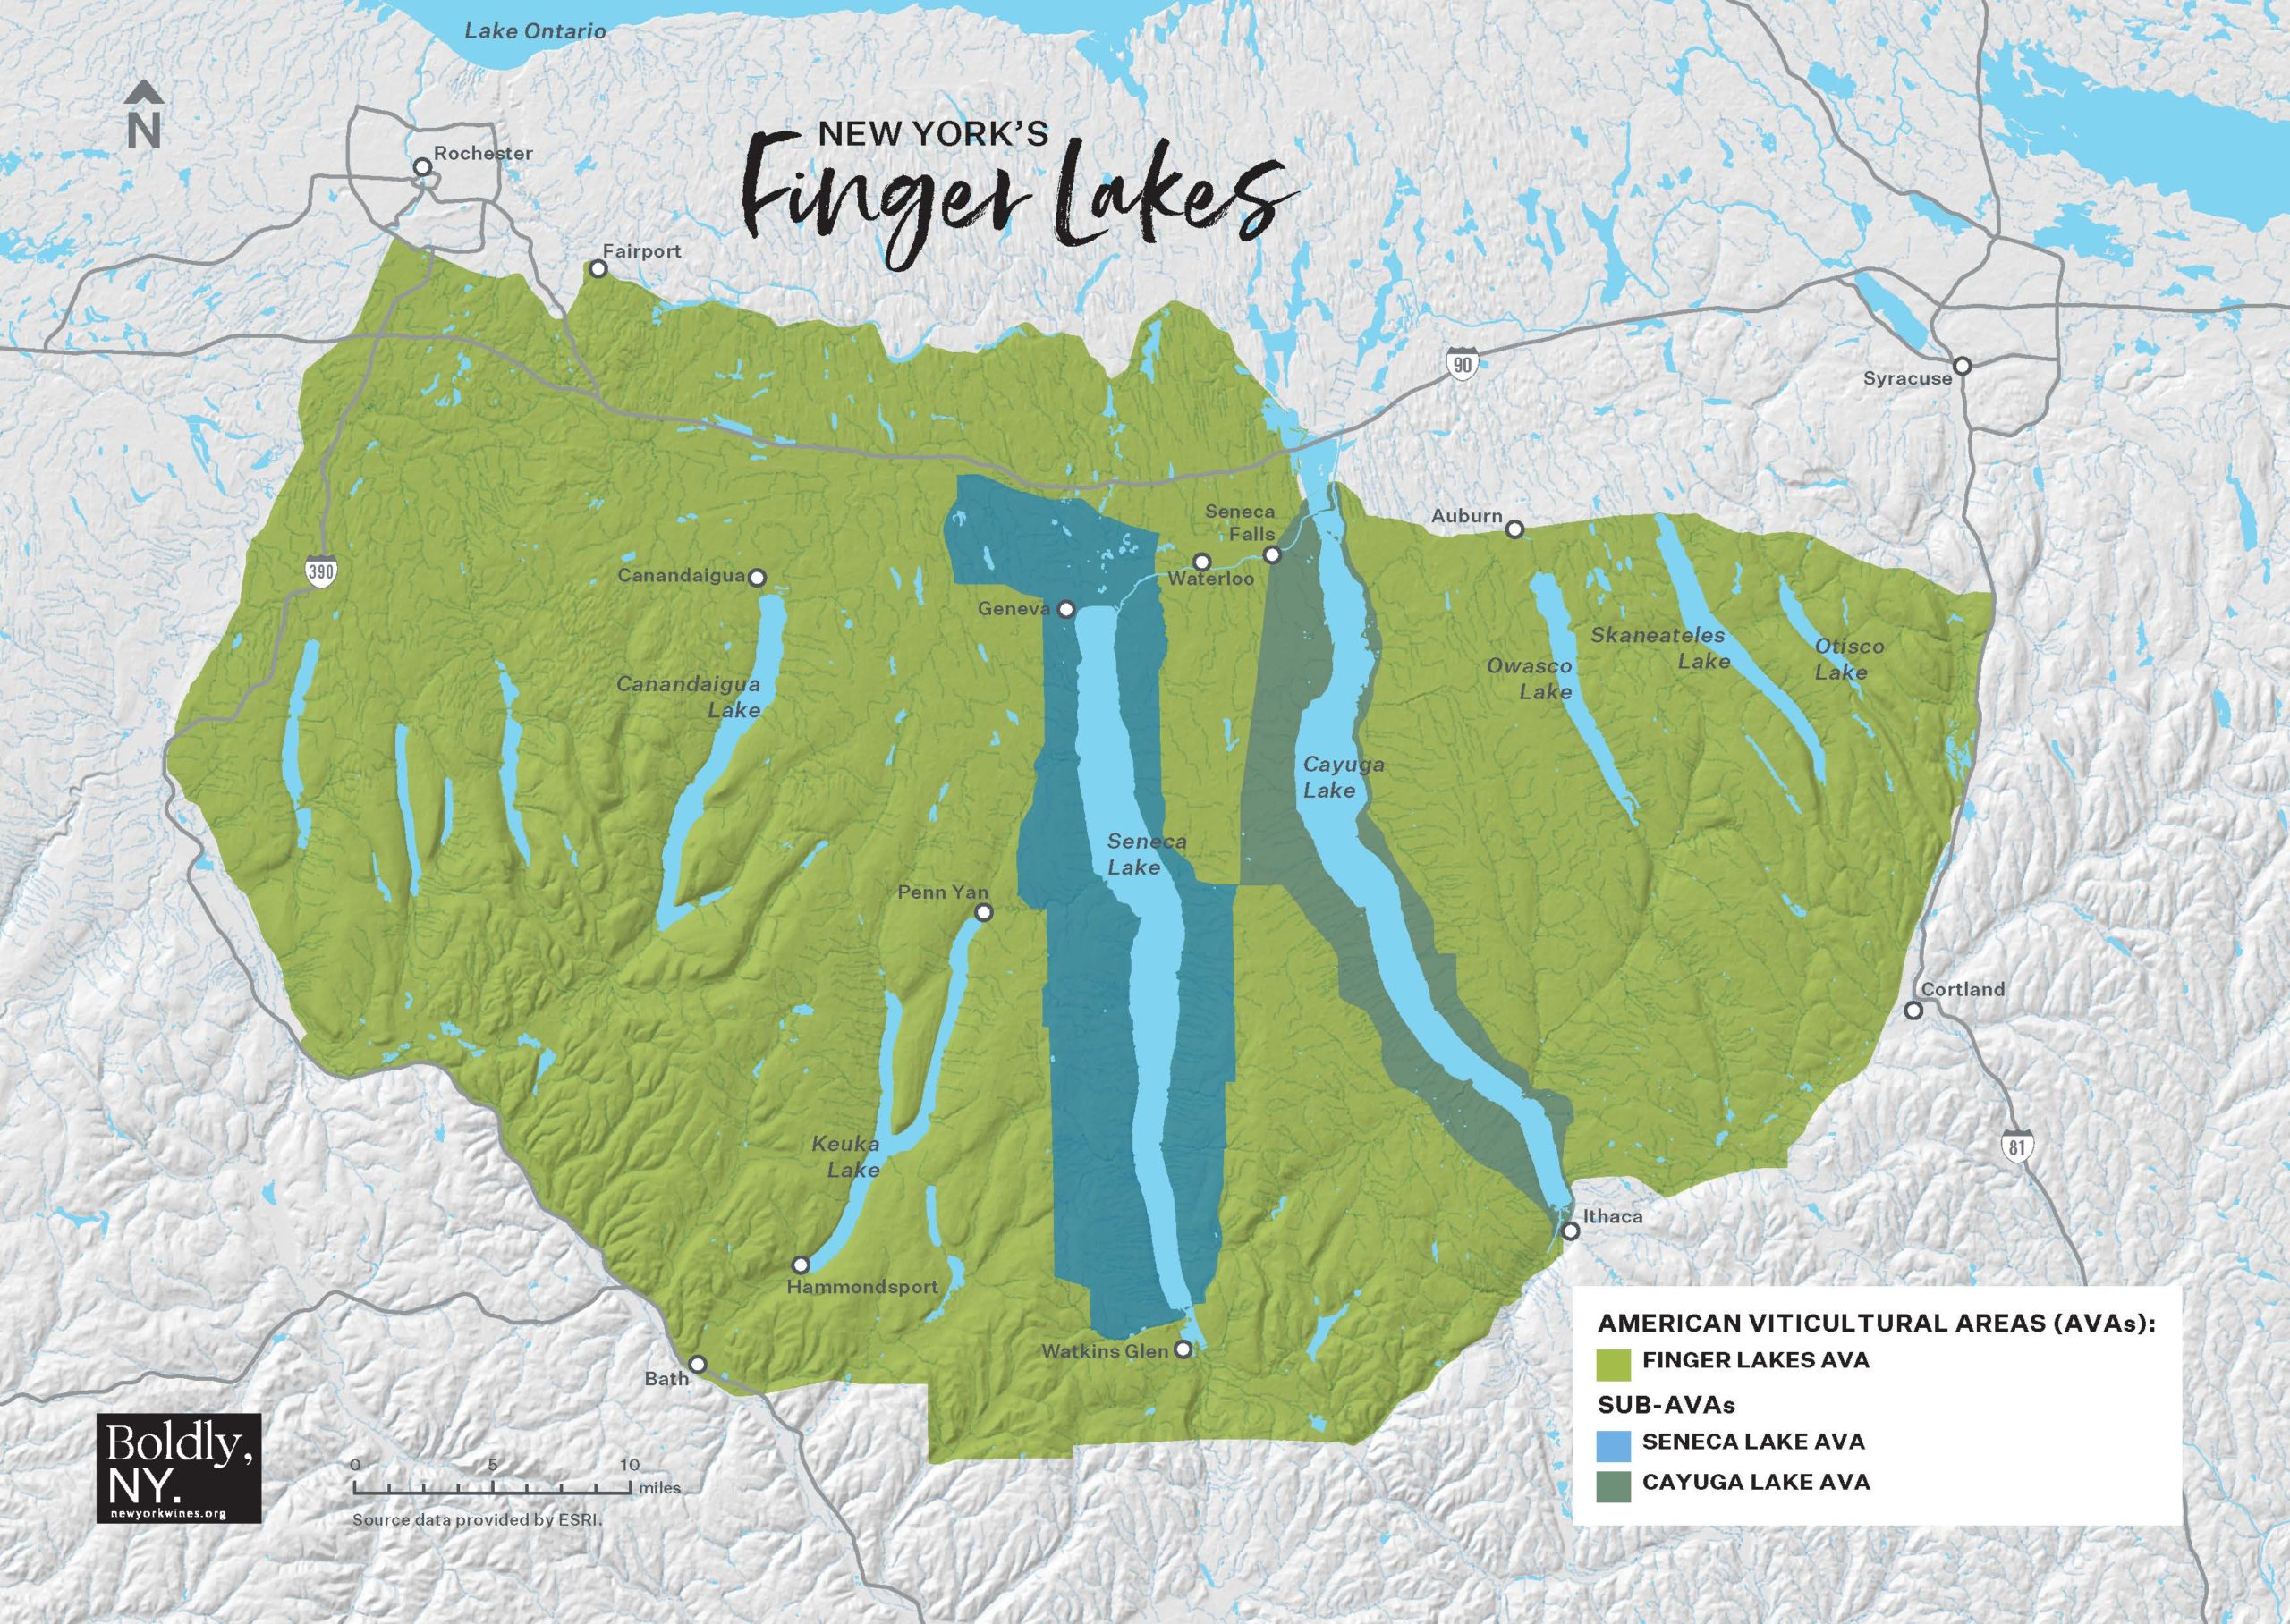 Finger Lakes Viticultural Areas (AVAs)